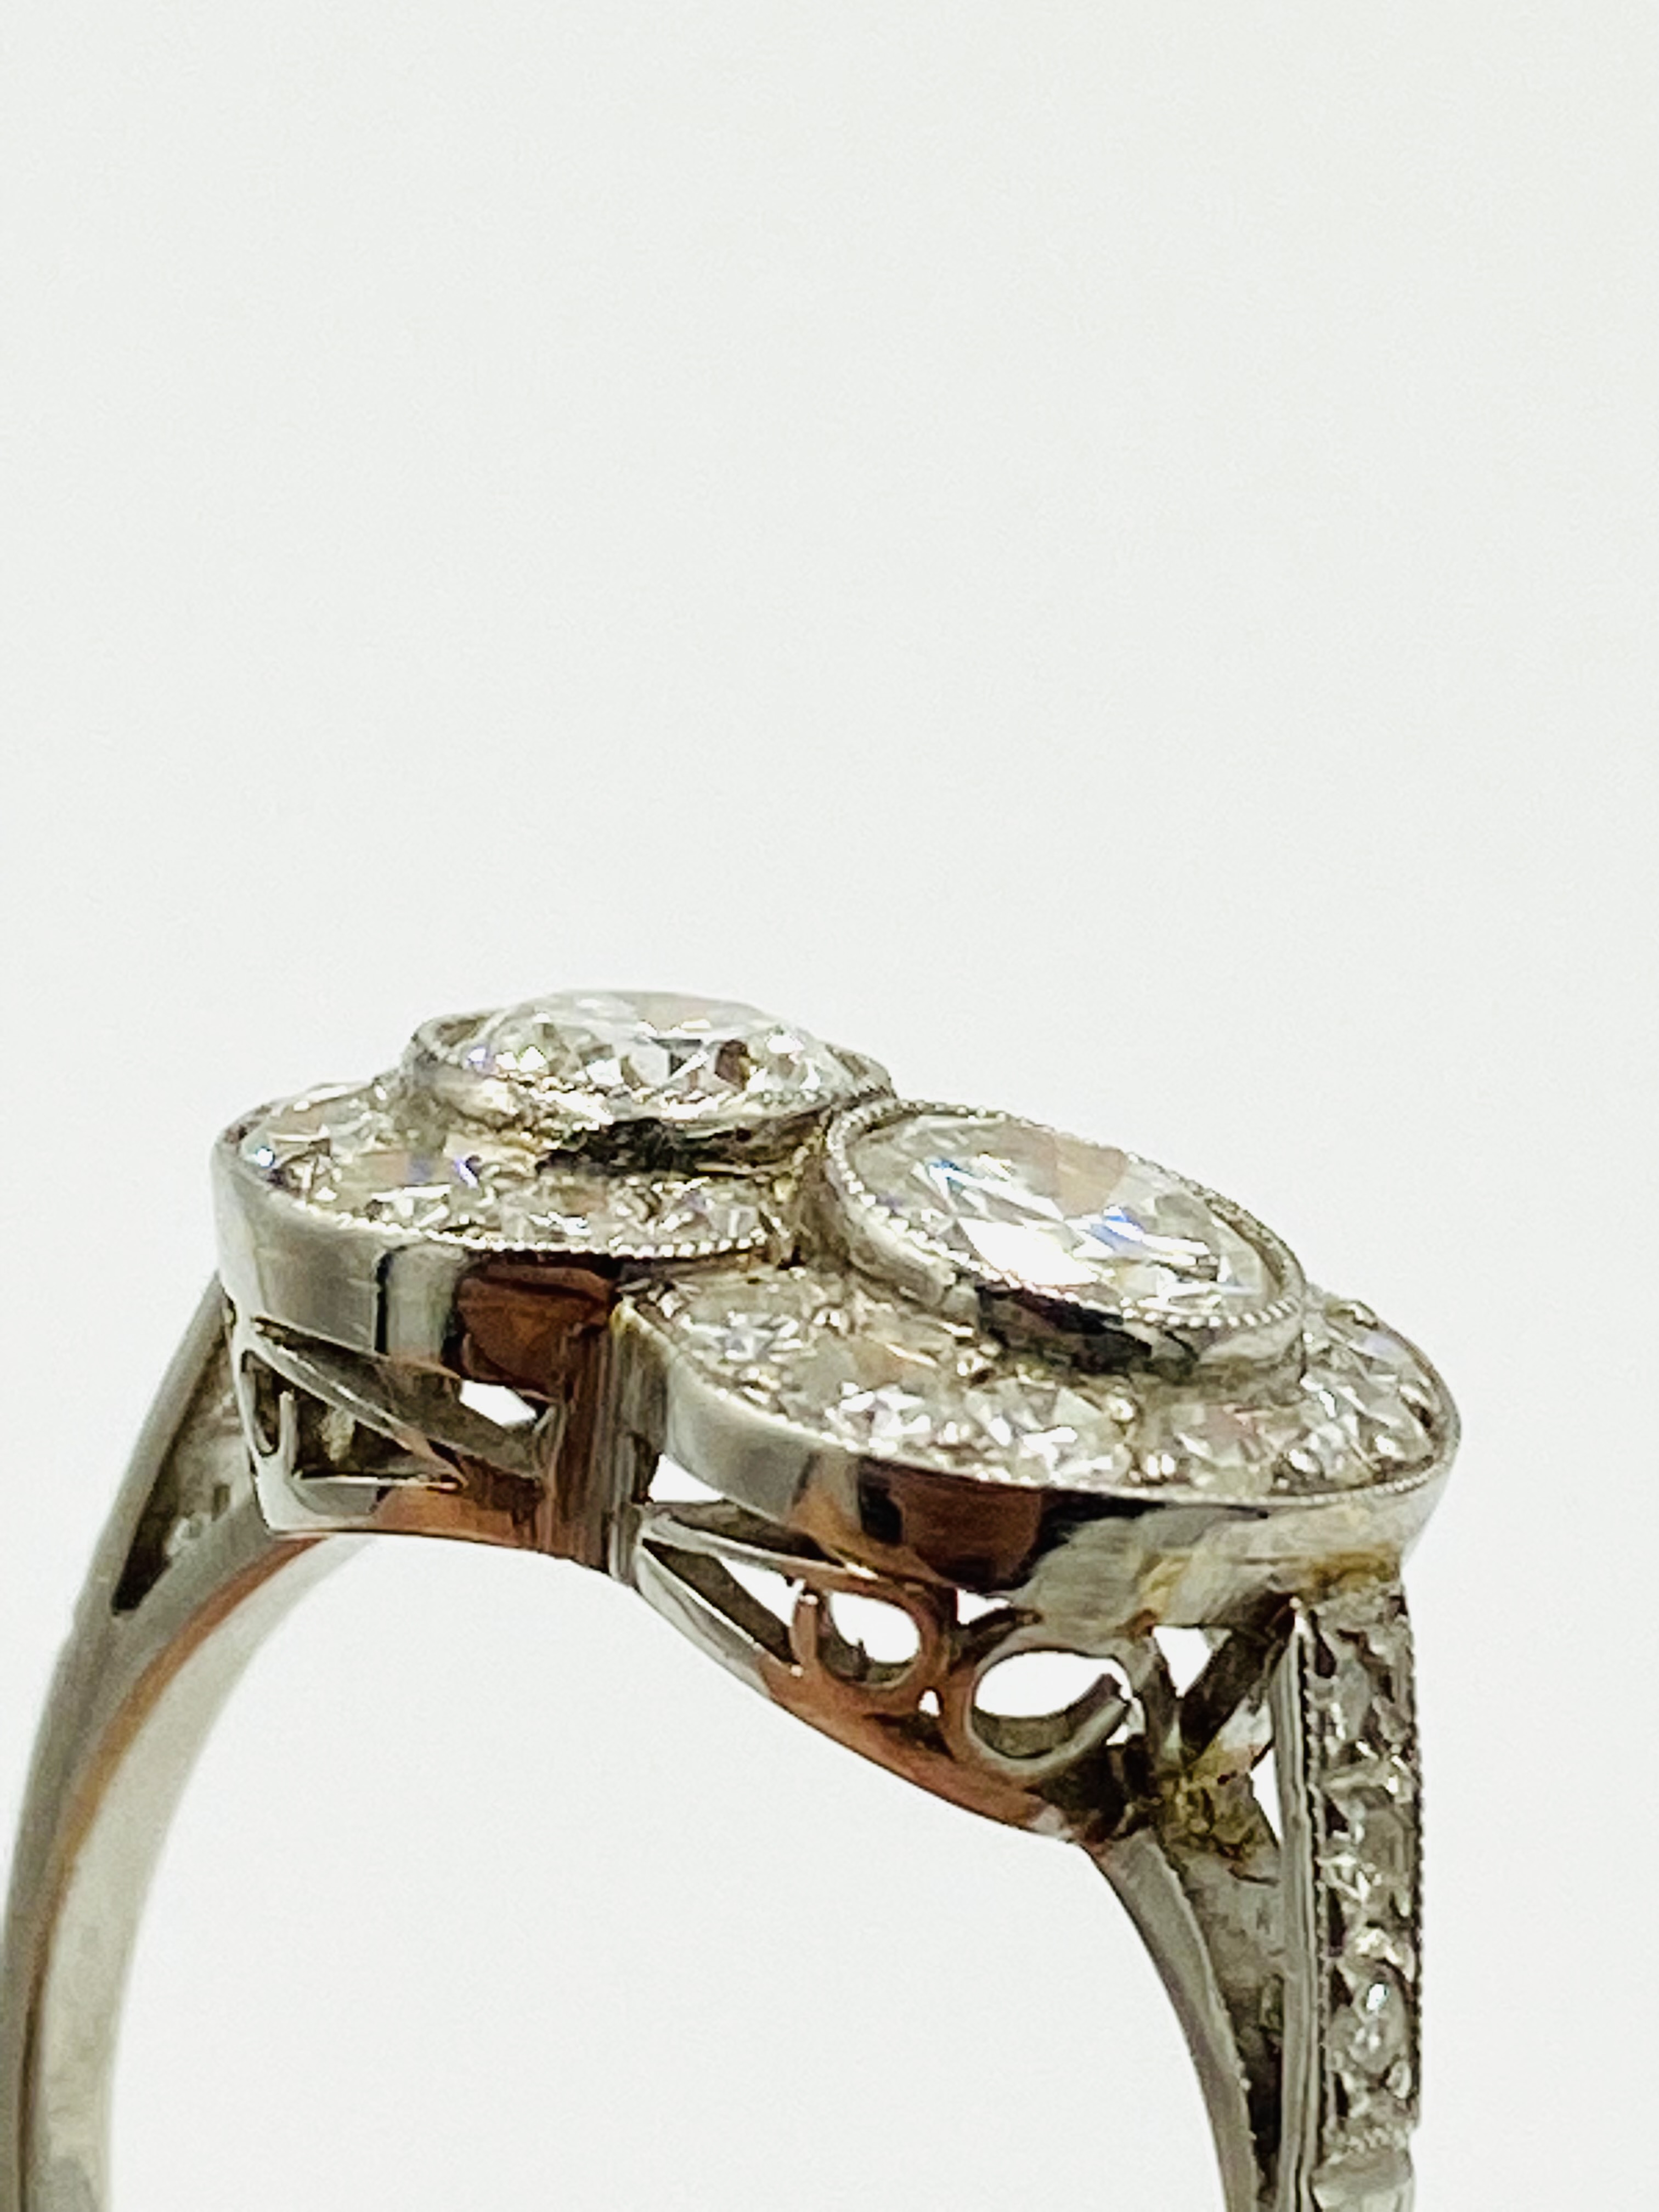 18ct white gold and diamond ring - Image 3 of 4